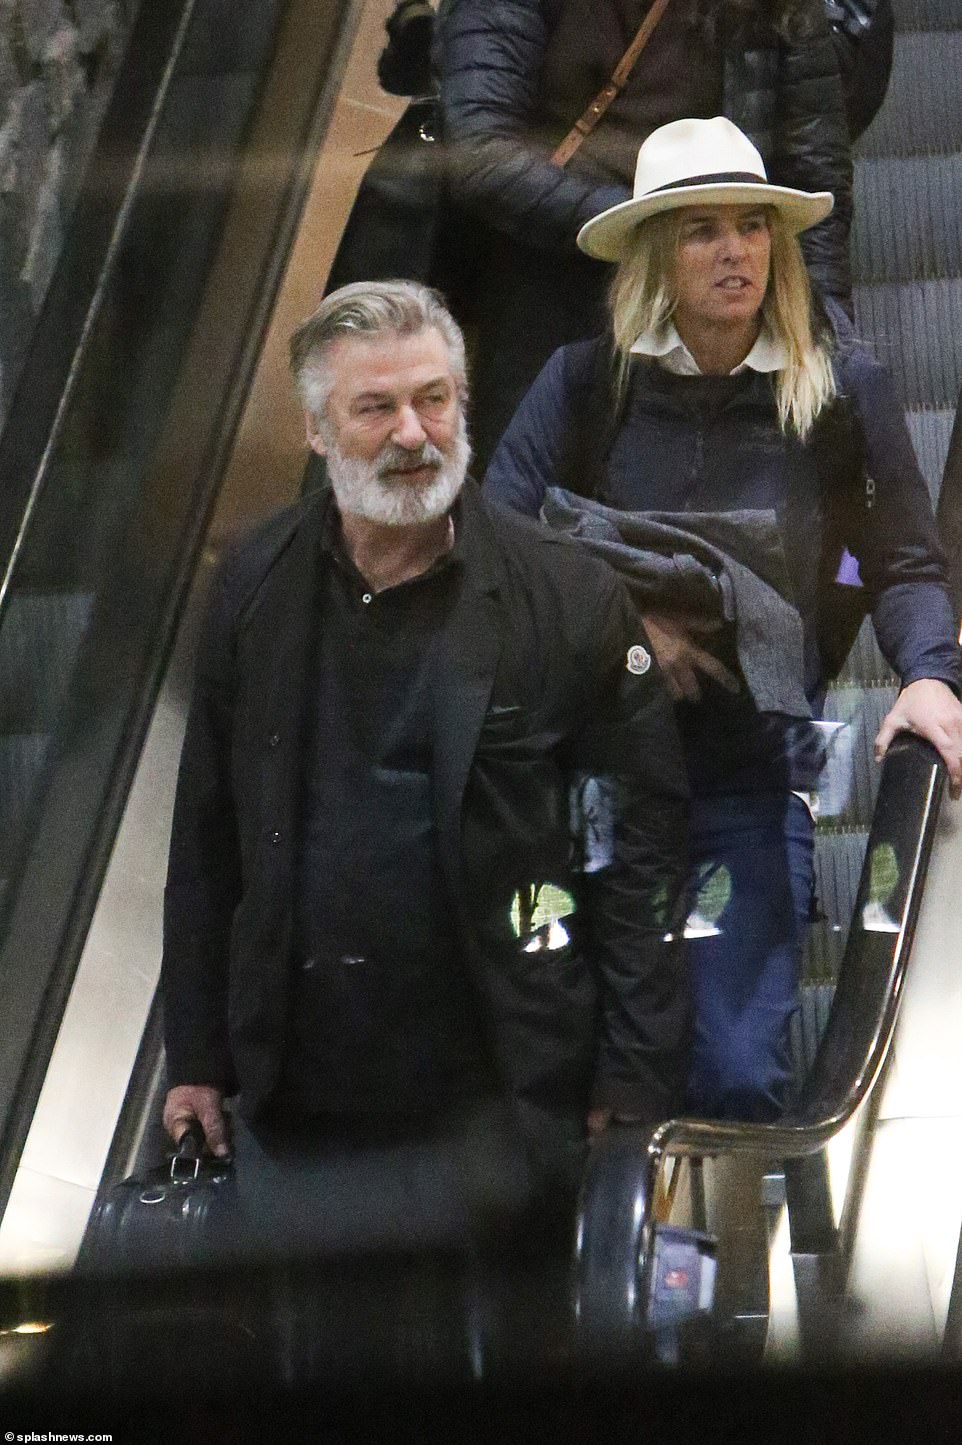 Alec Baldwin has hired Rory Kennedy to film a reality documentary about his troubled Western movie Rust, DailyMail.com can reveal. They were pictured arriving at a Montana airport